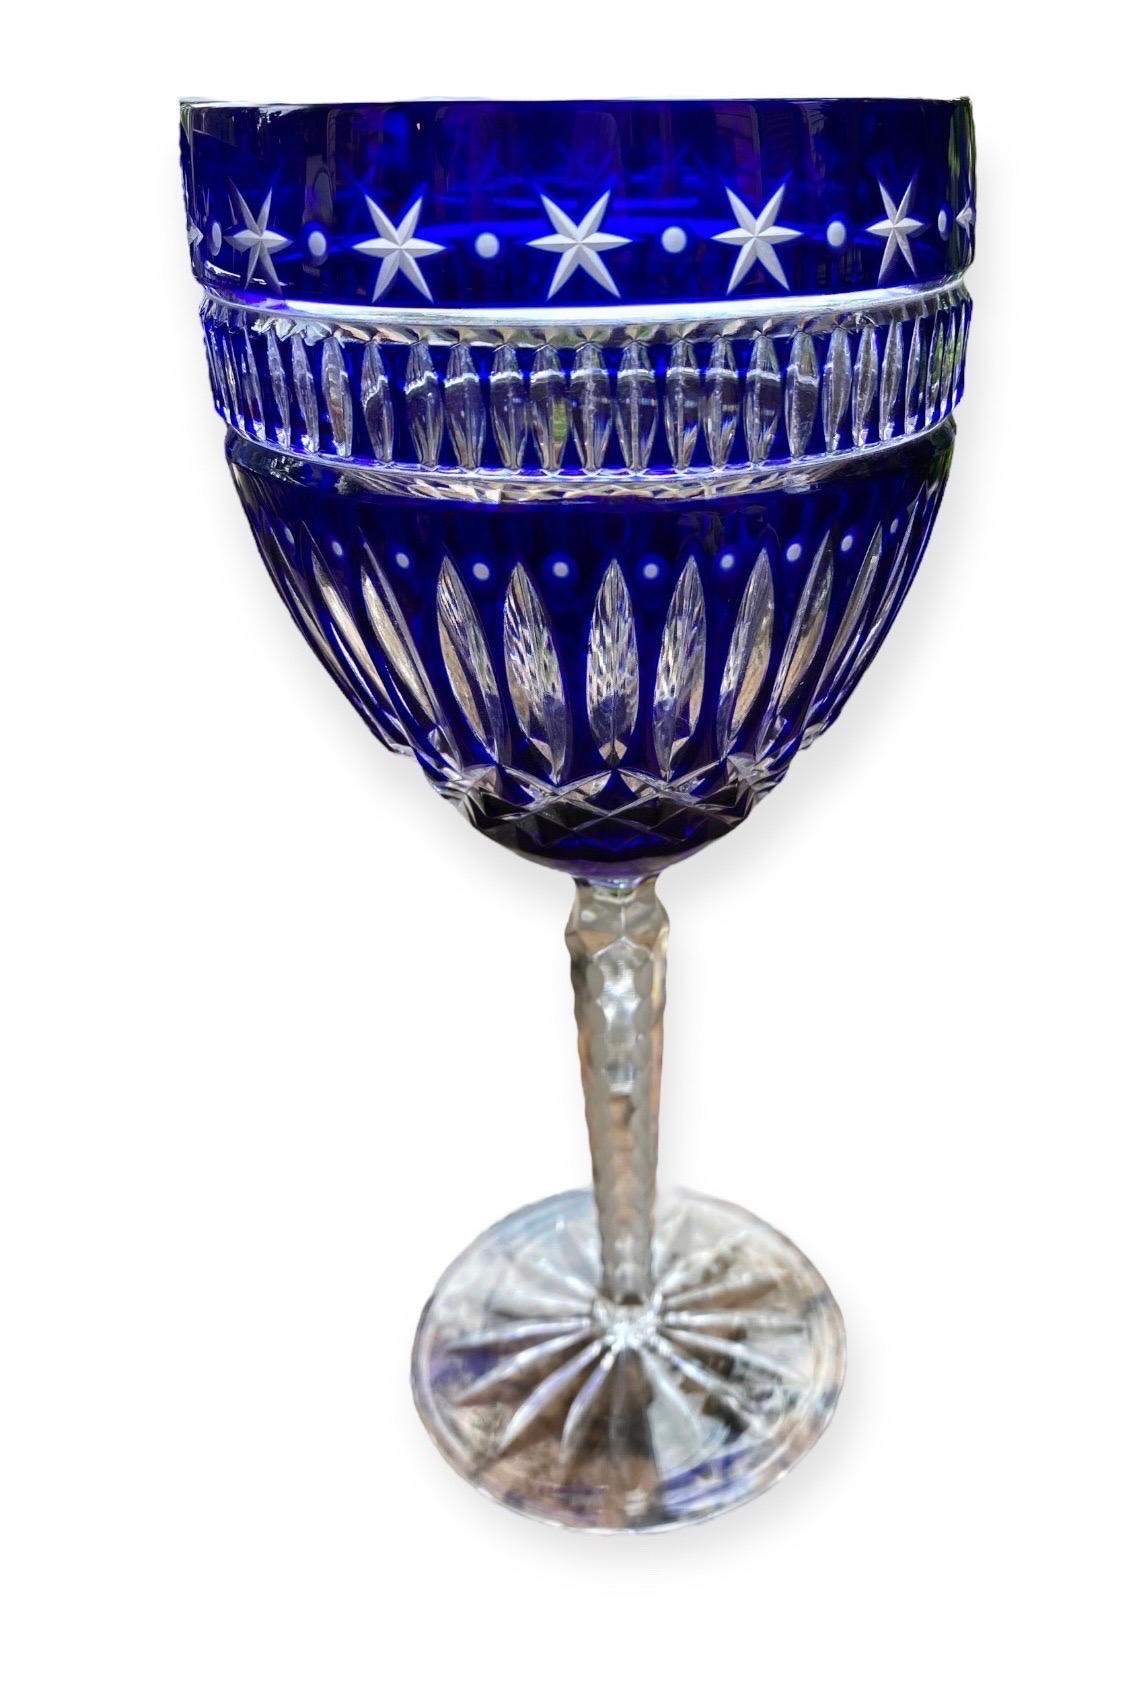 Six Ajka Serenity Star Cobalt Blue Cut To Clear Water Goblets Wine Glasses For Sale 11